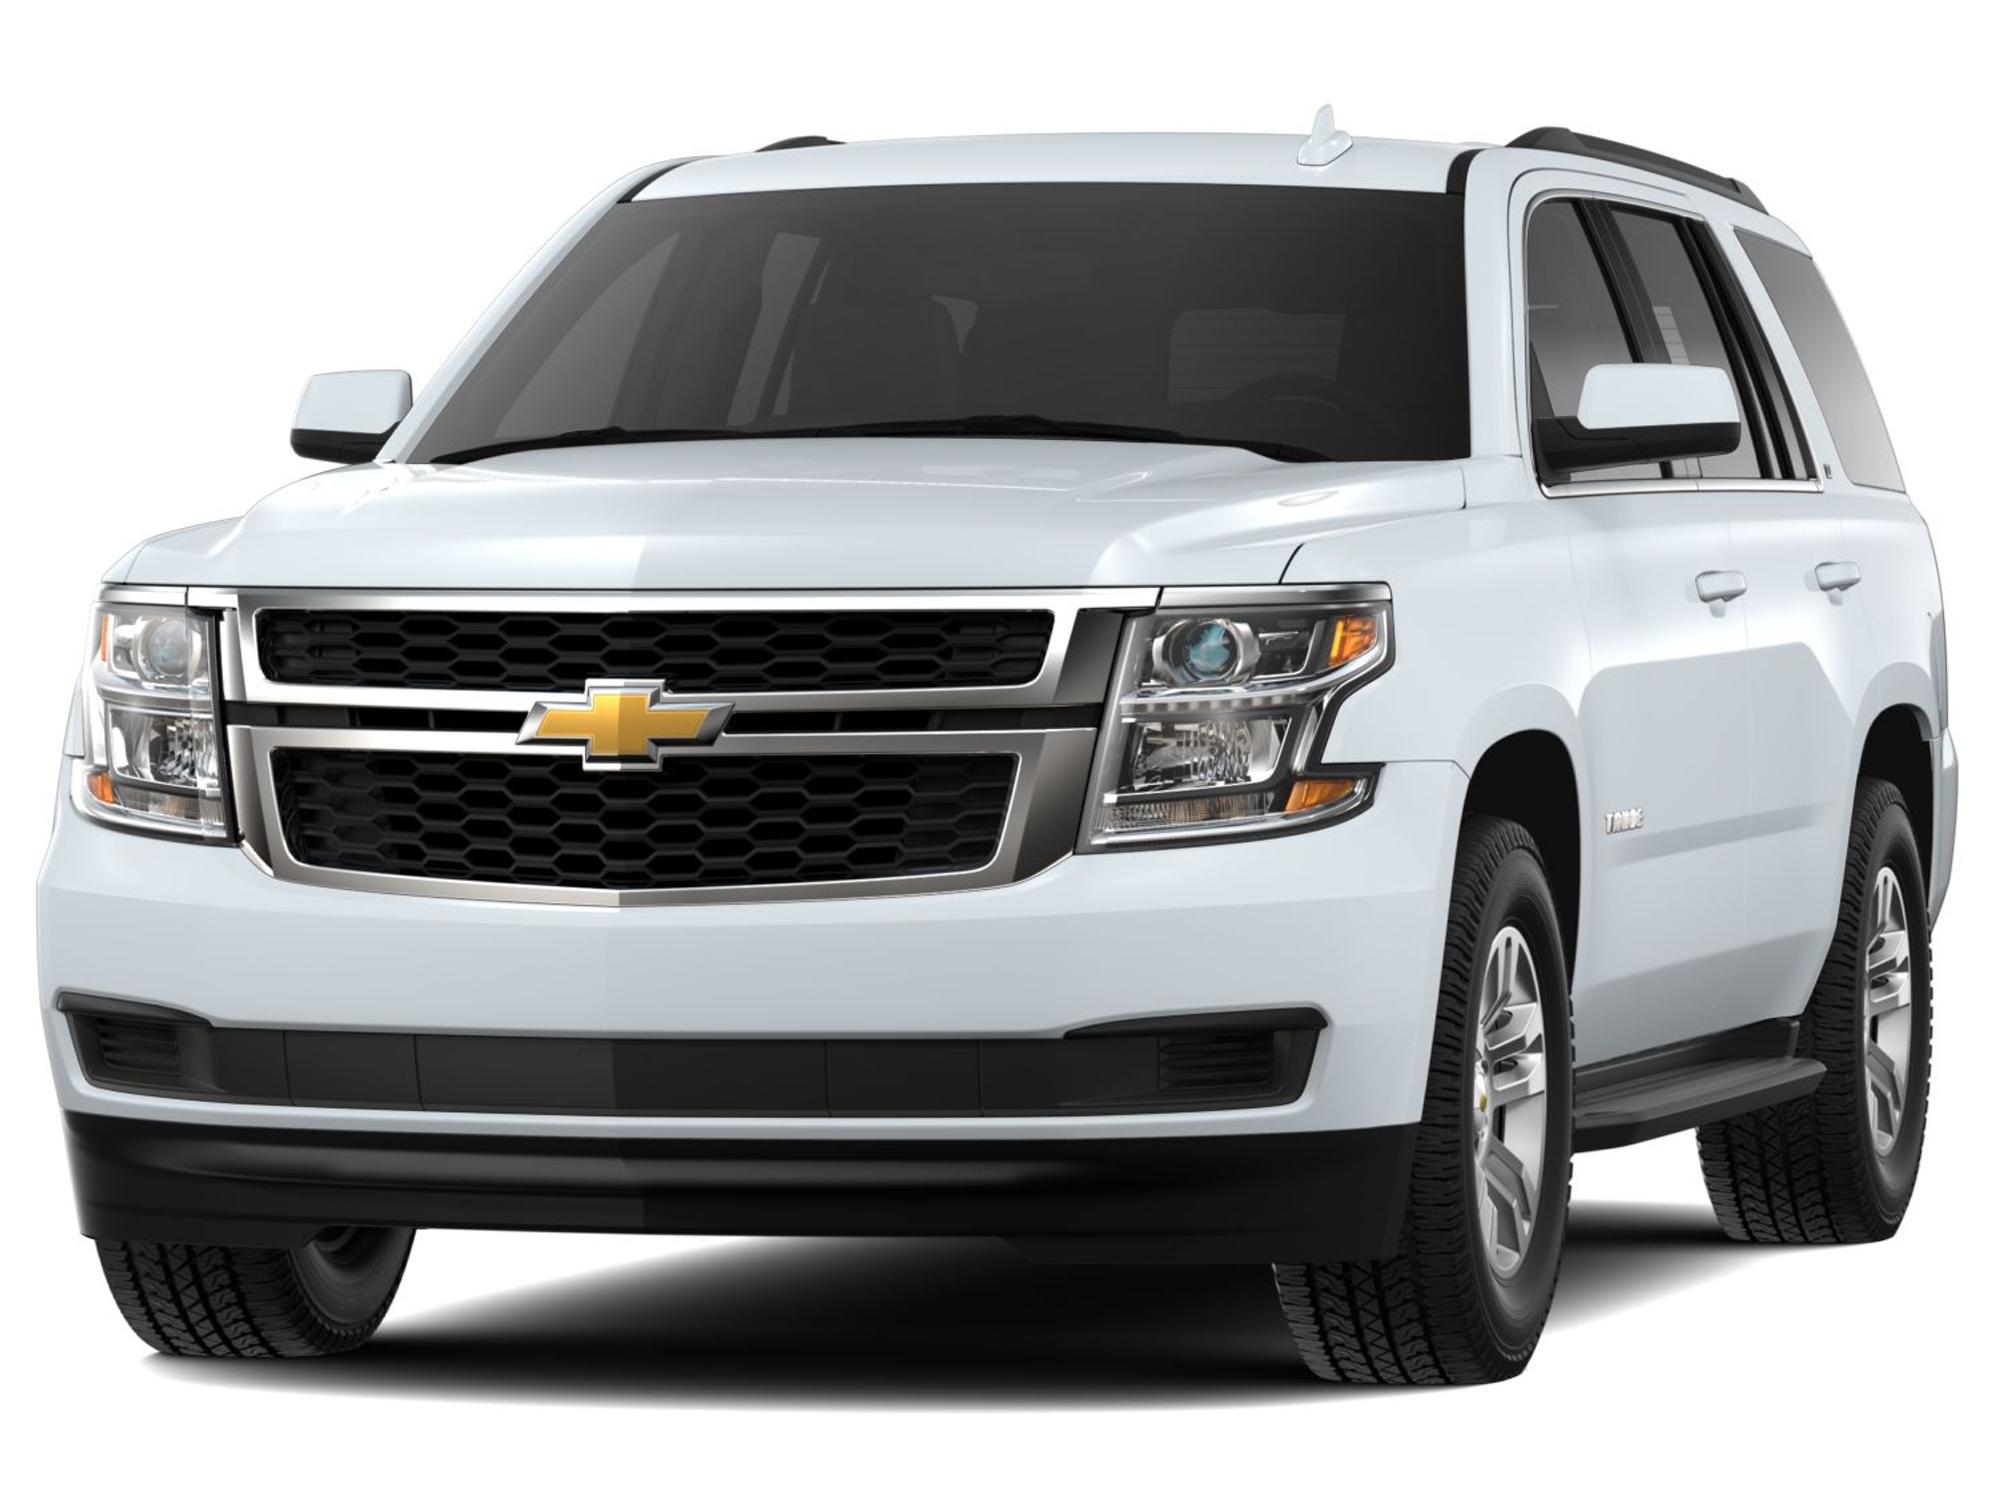 62 Popular 2019 chevy tahoe exterior colors with Sample Images